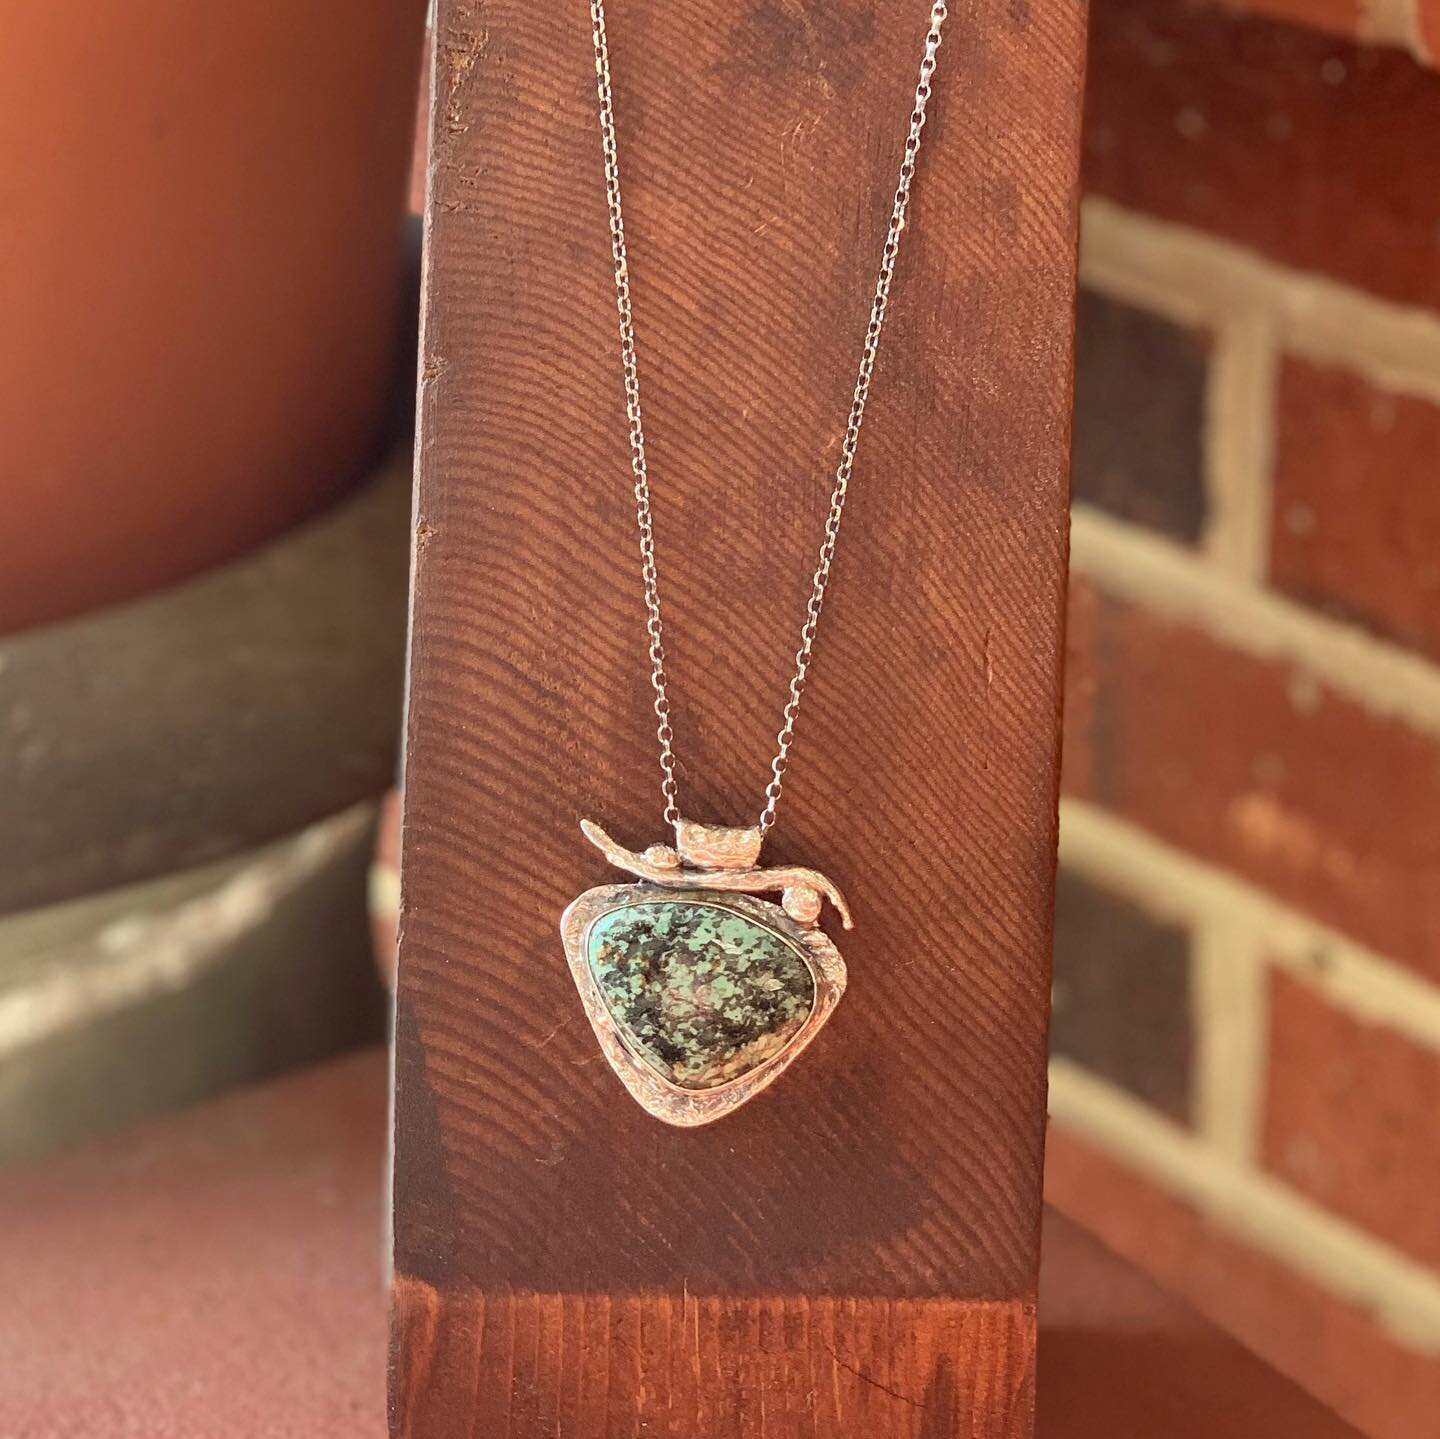 So in love with these new pendant necklaces that Annie just brought in 😍 Were so happy she got some time away from the gallery to be in her studio. 
.
.
.
#sterlingsilverjewelry #finesilverjewelry #semipreciousstones #handcrafted #handcraftedjewelry